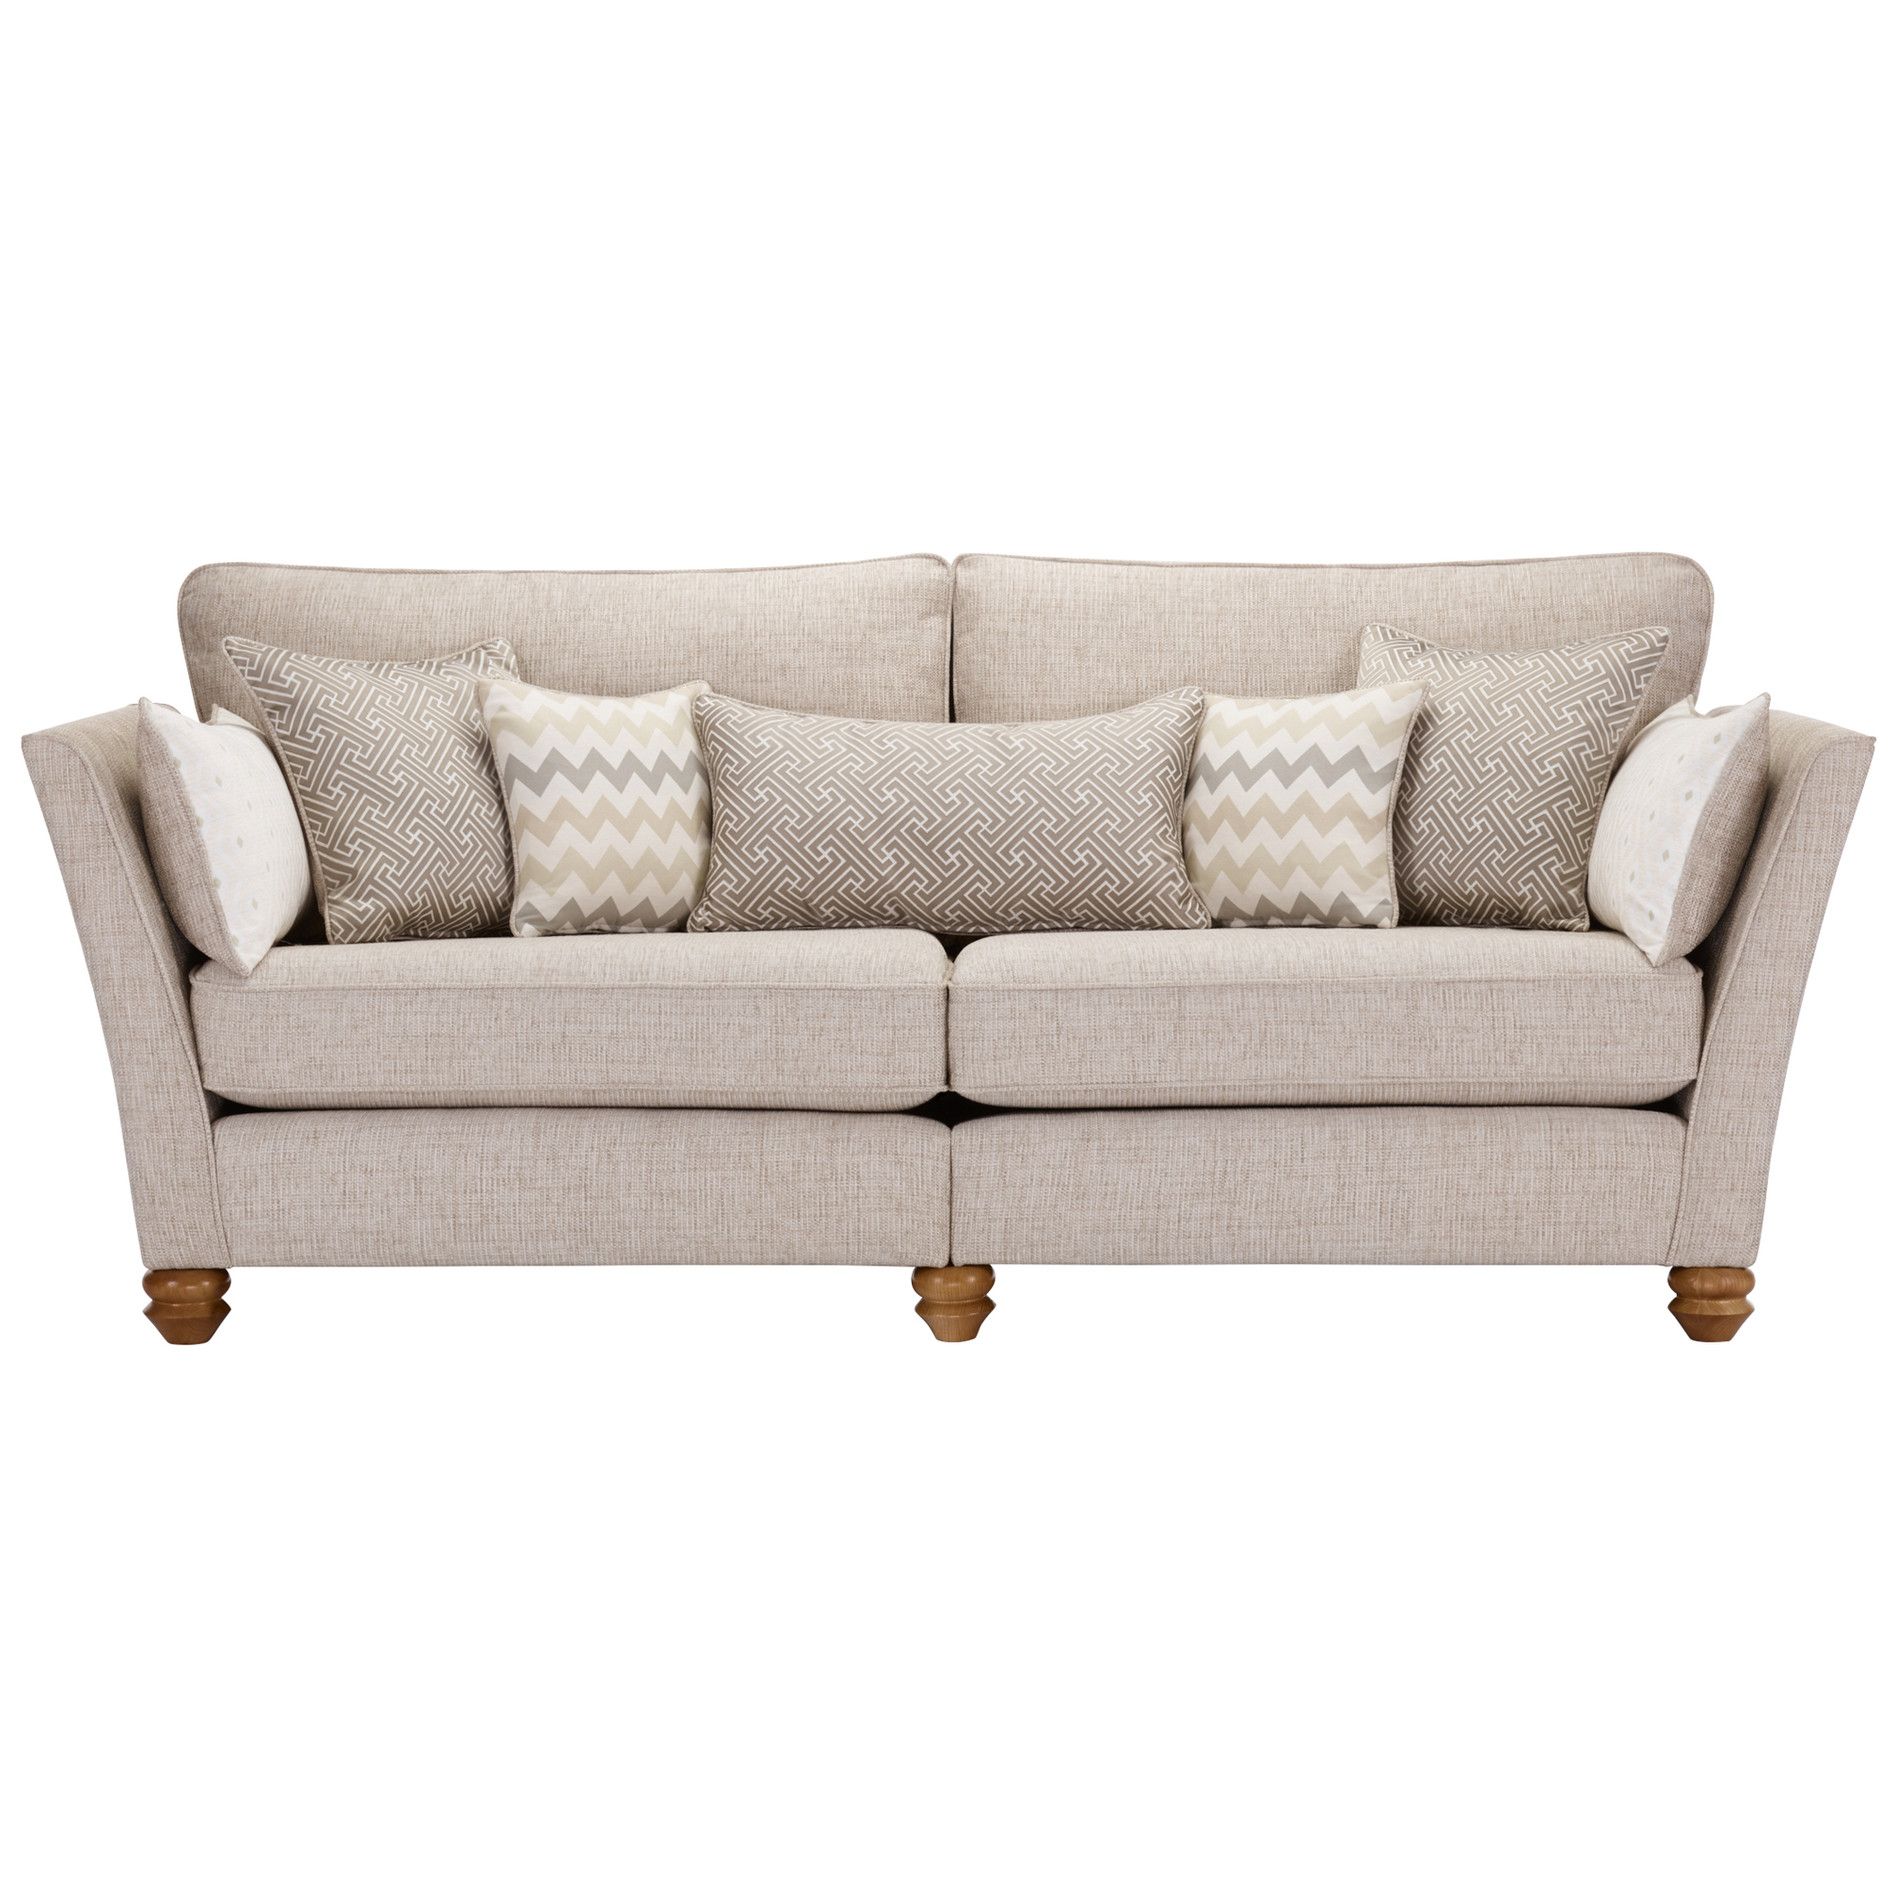 Gainsborough 4 Seater Sofa In Beige + Matching Scatters Regarding Sofas In Beige (View 14 of 20)